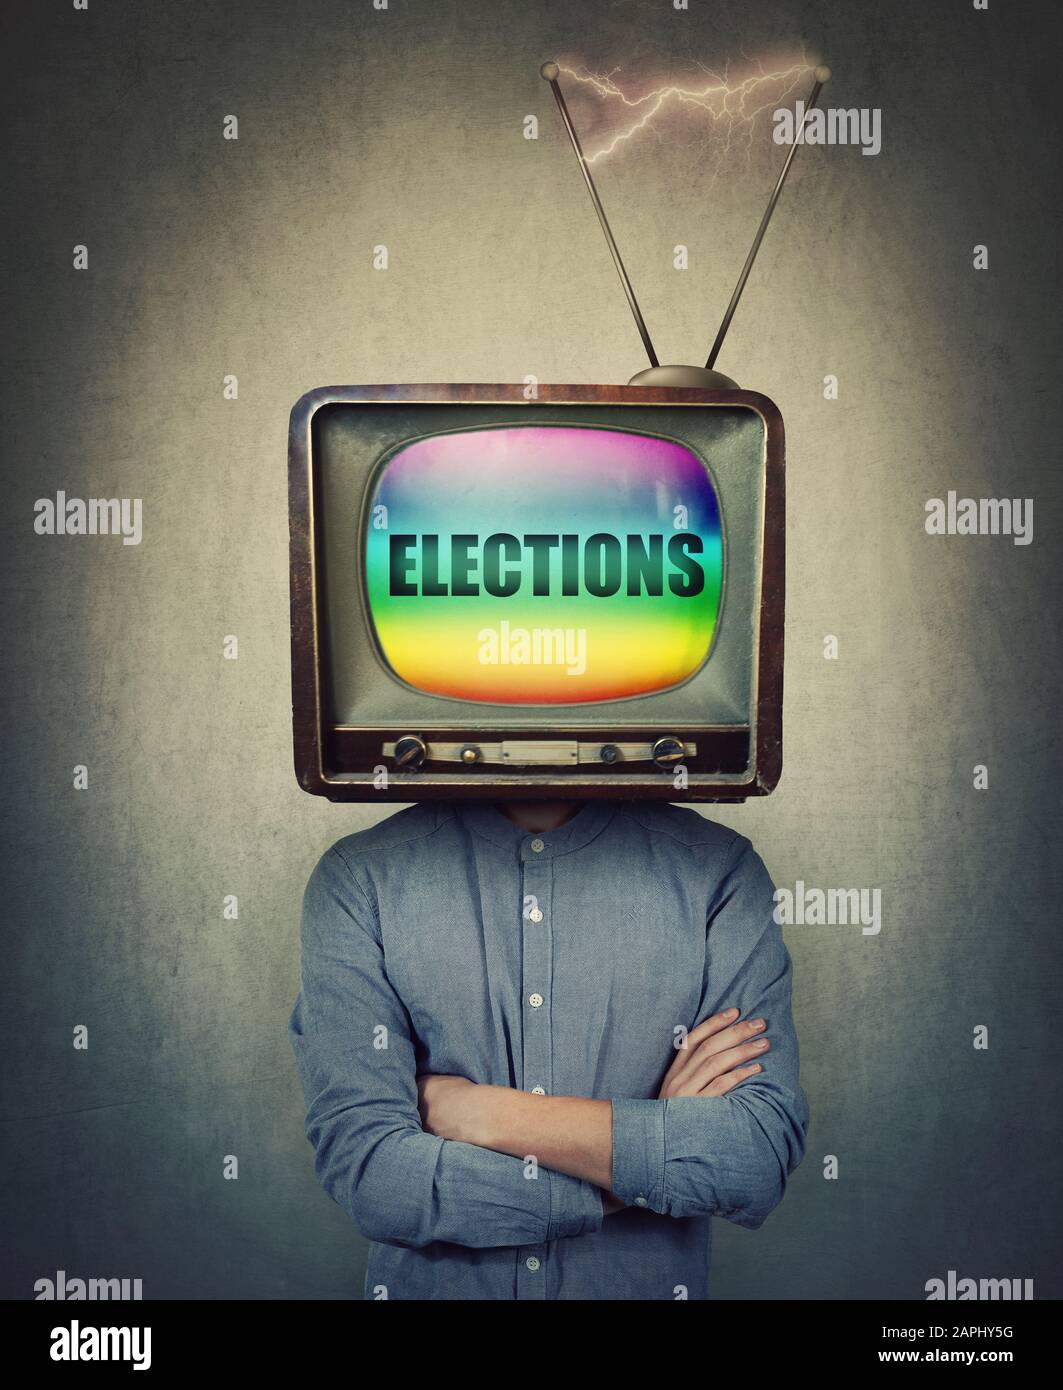 Surreal young man journalist with an old tv box instead of head, showing elections news on the screen. Television manipulation and crowd control, brai Stock Photo